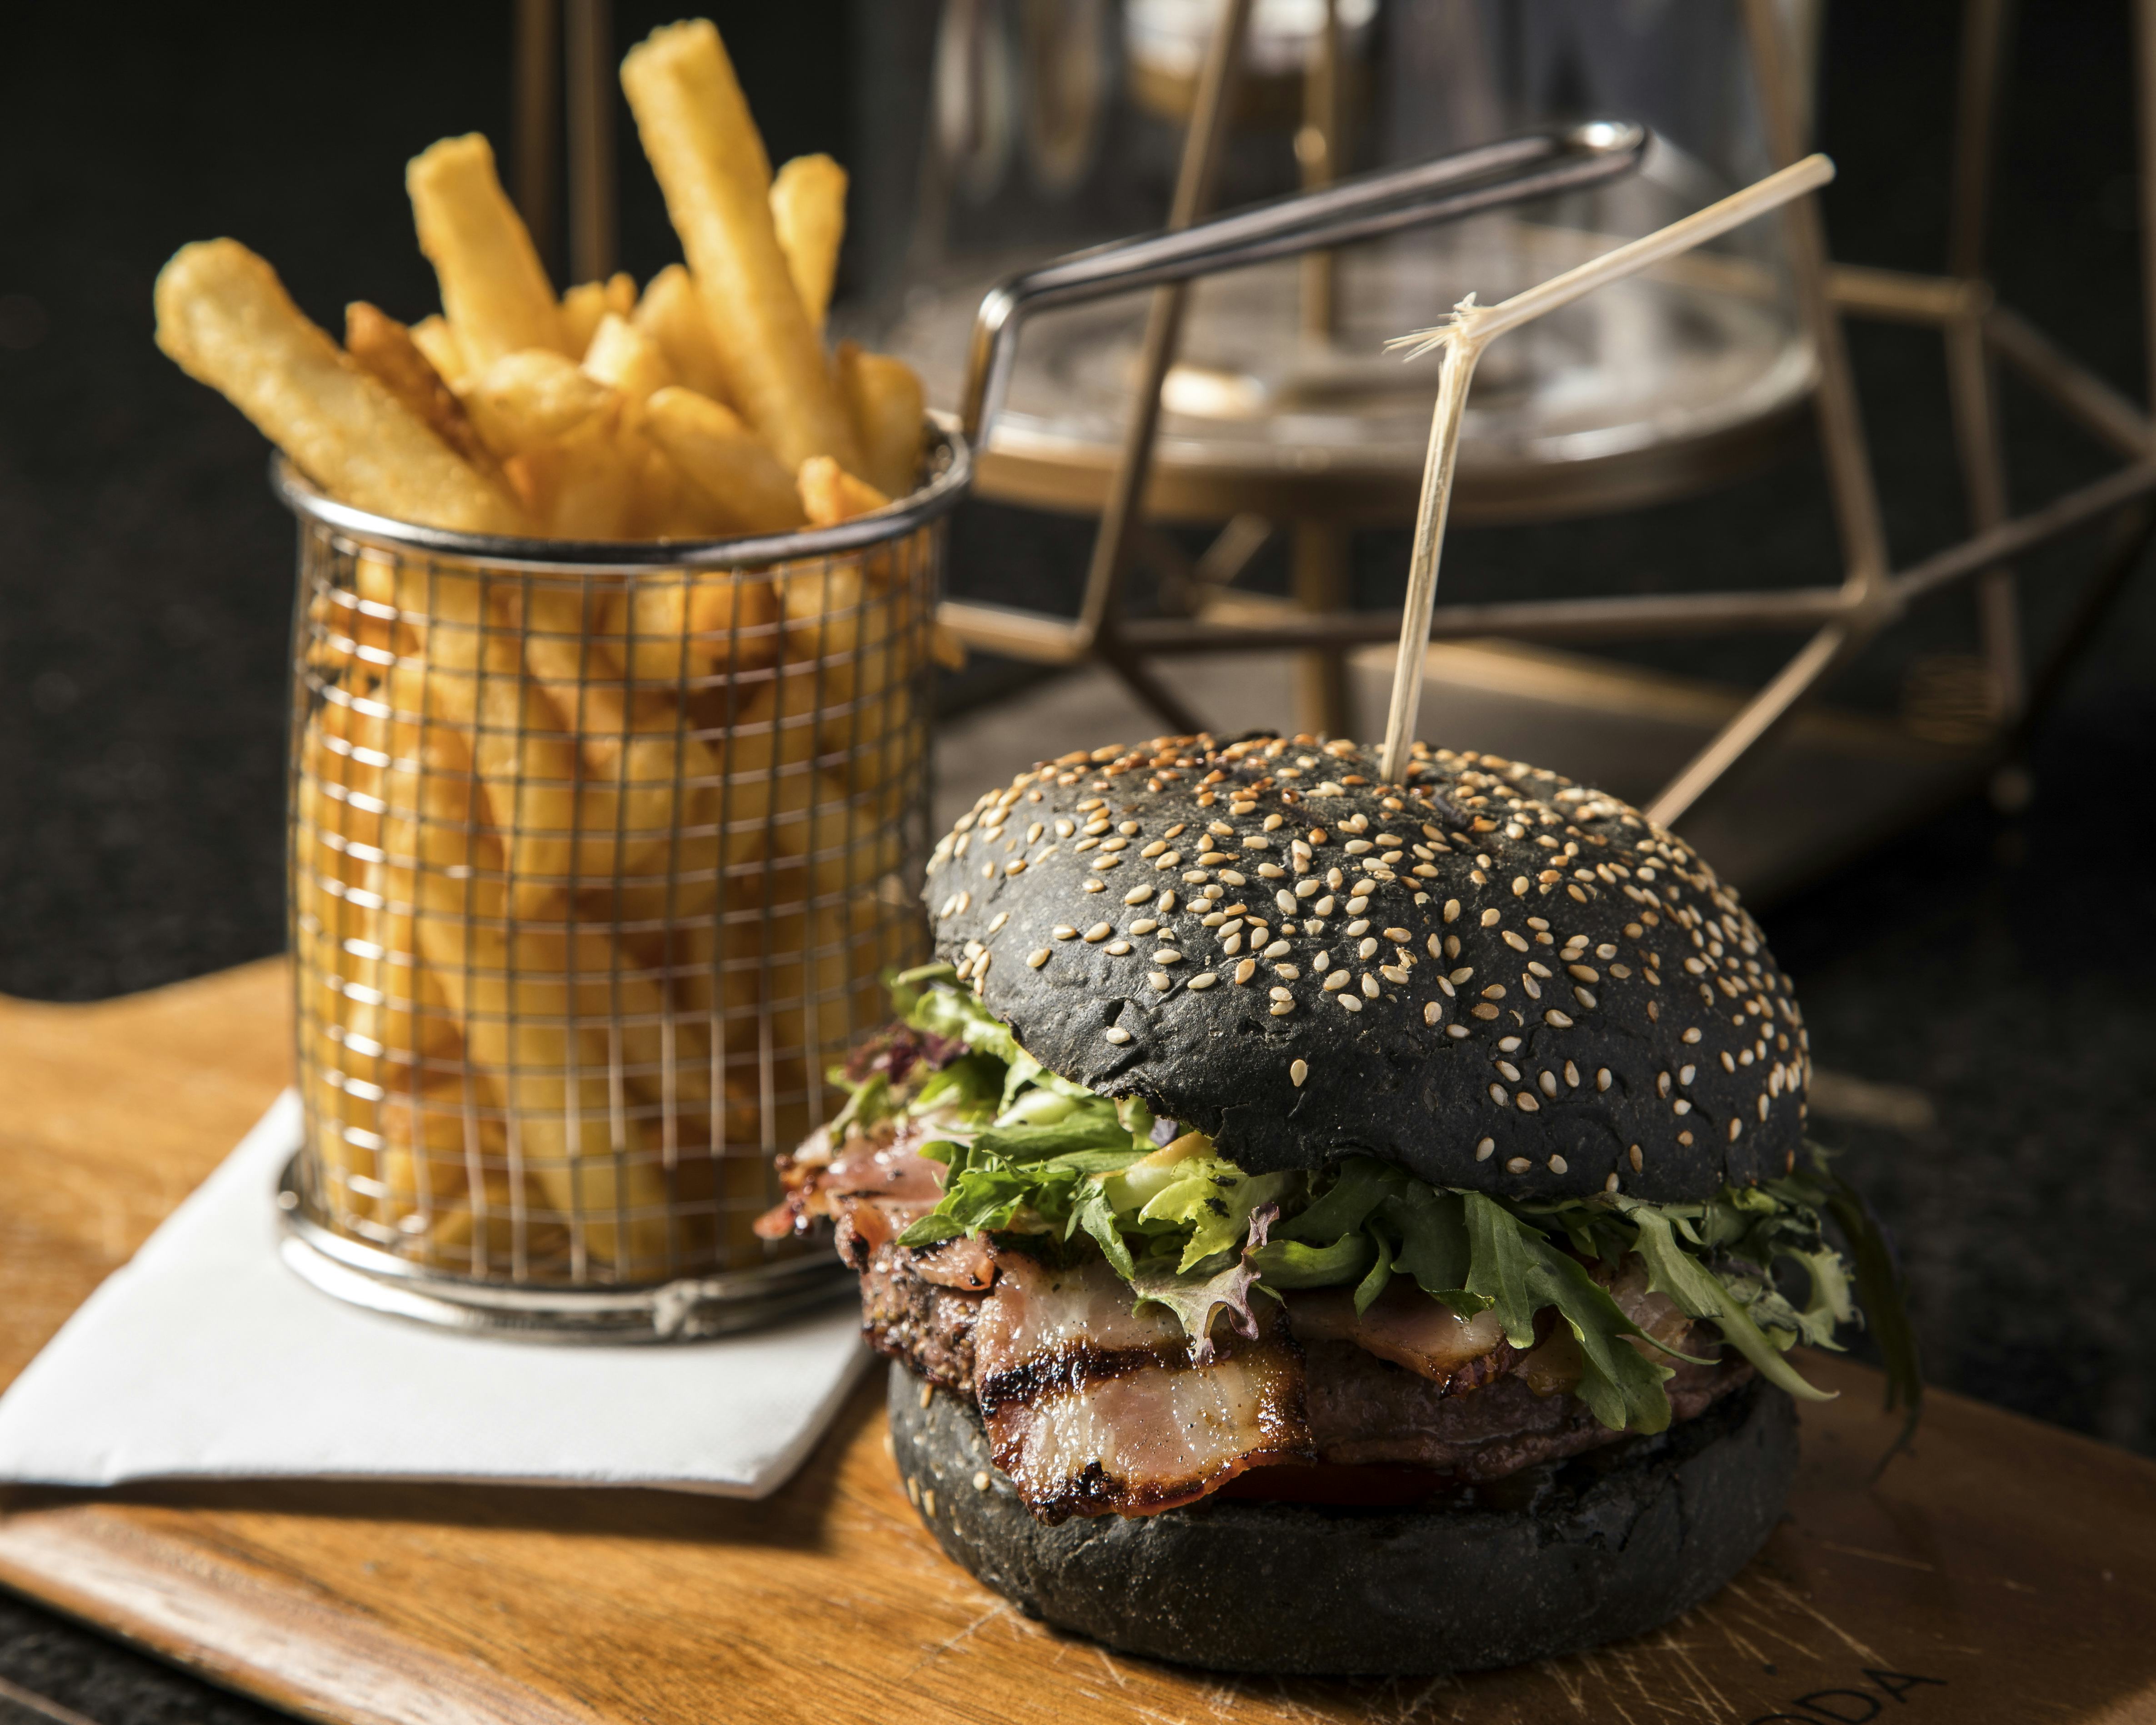 Full shot of a black hamburger and fries on a table